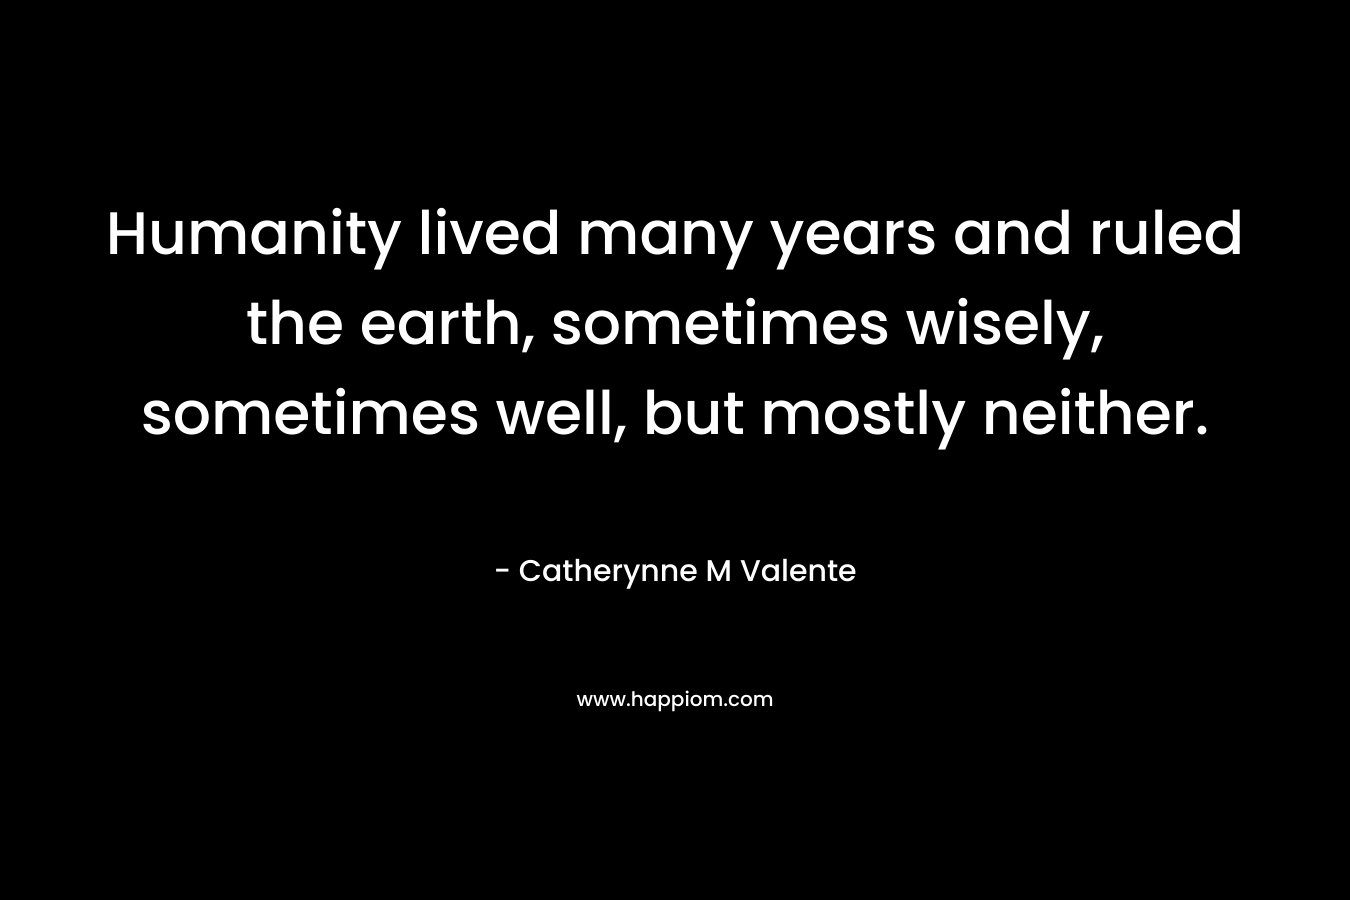 Humanity lived many years and ruled the earth, sometimes wisely, sometimes well, but mostly neither. – Catherynne M Valente